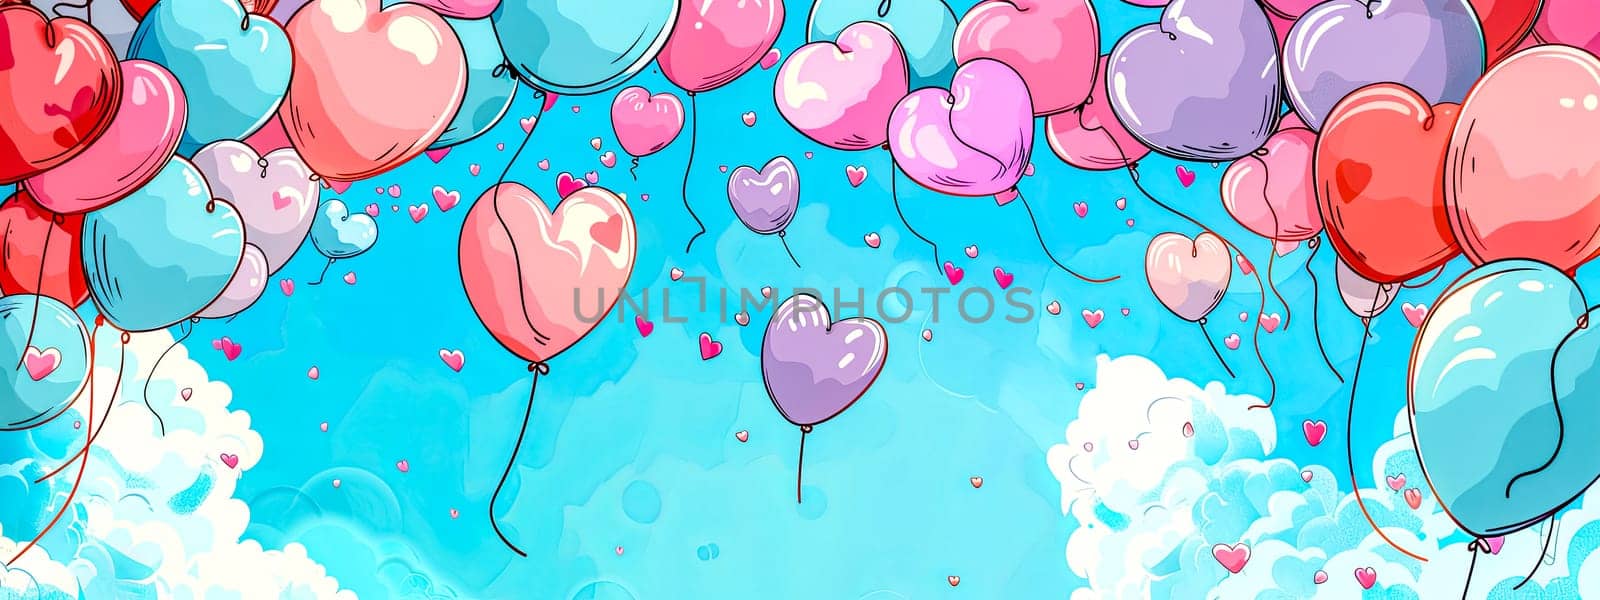 Vibrant heart-shaped balloons floating in a cheerful blue sky with fluffy clouds